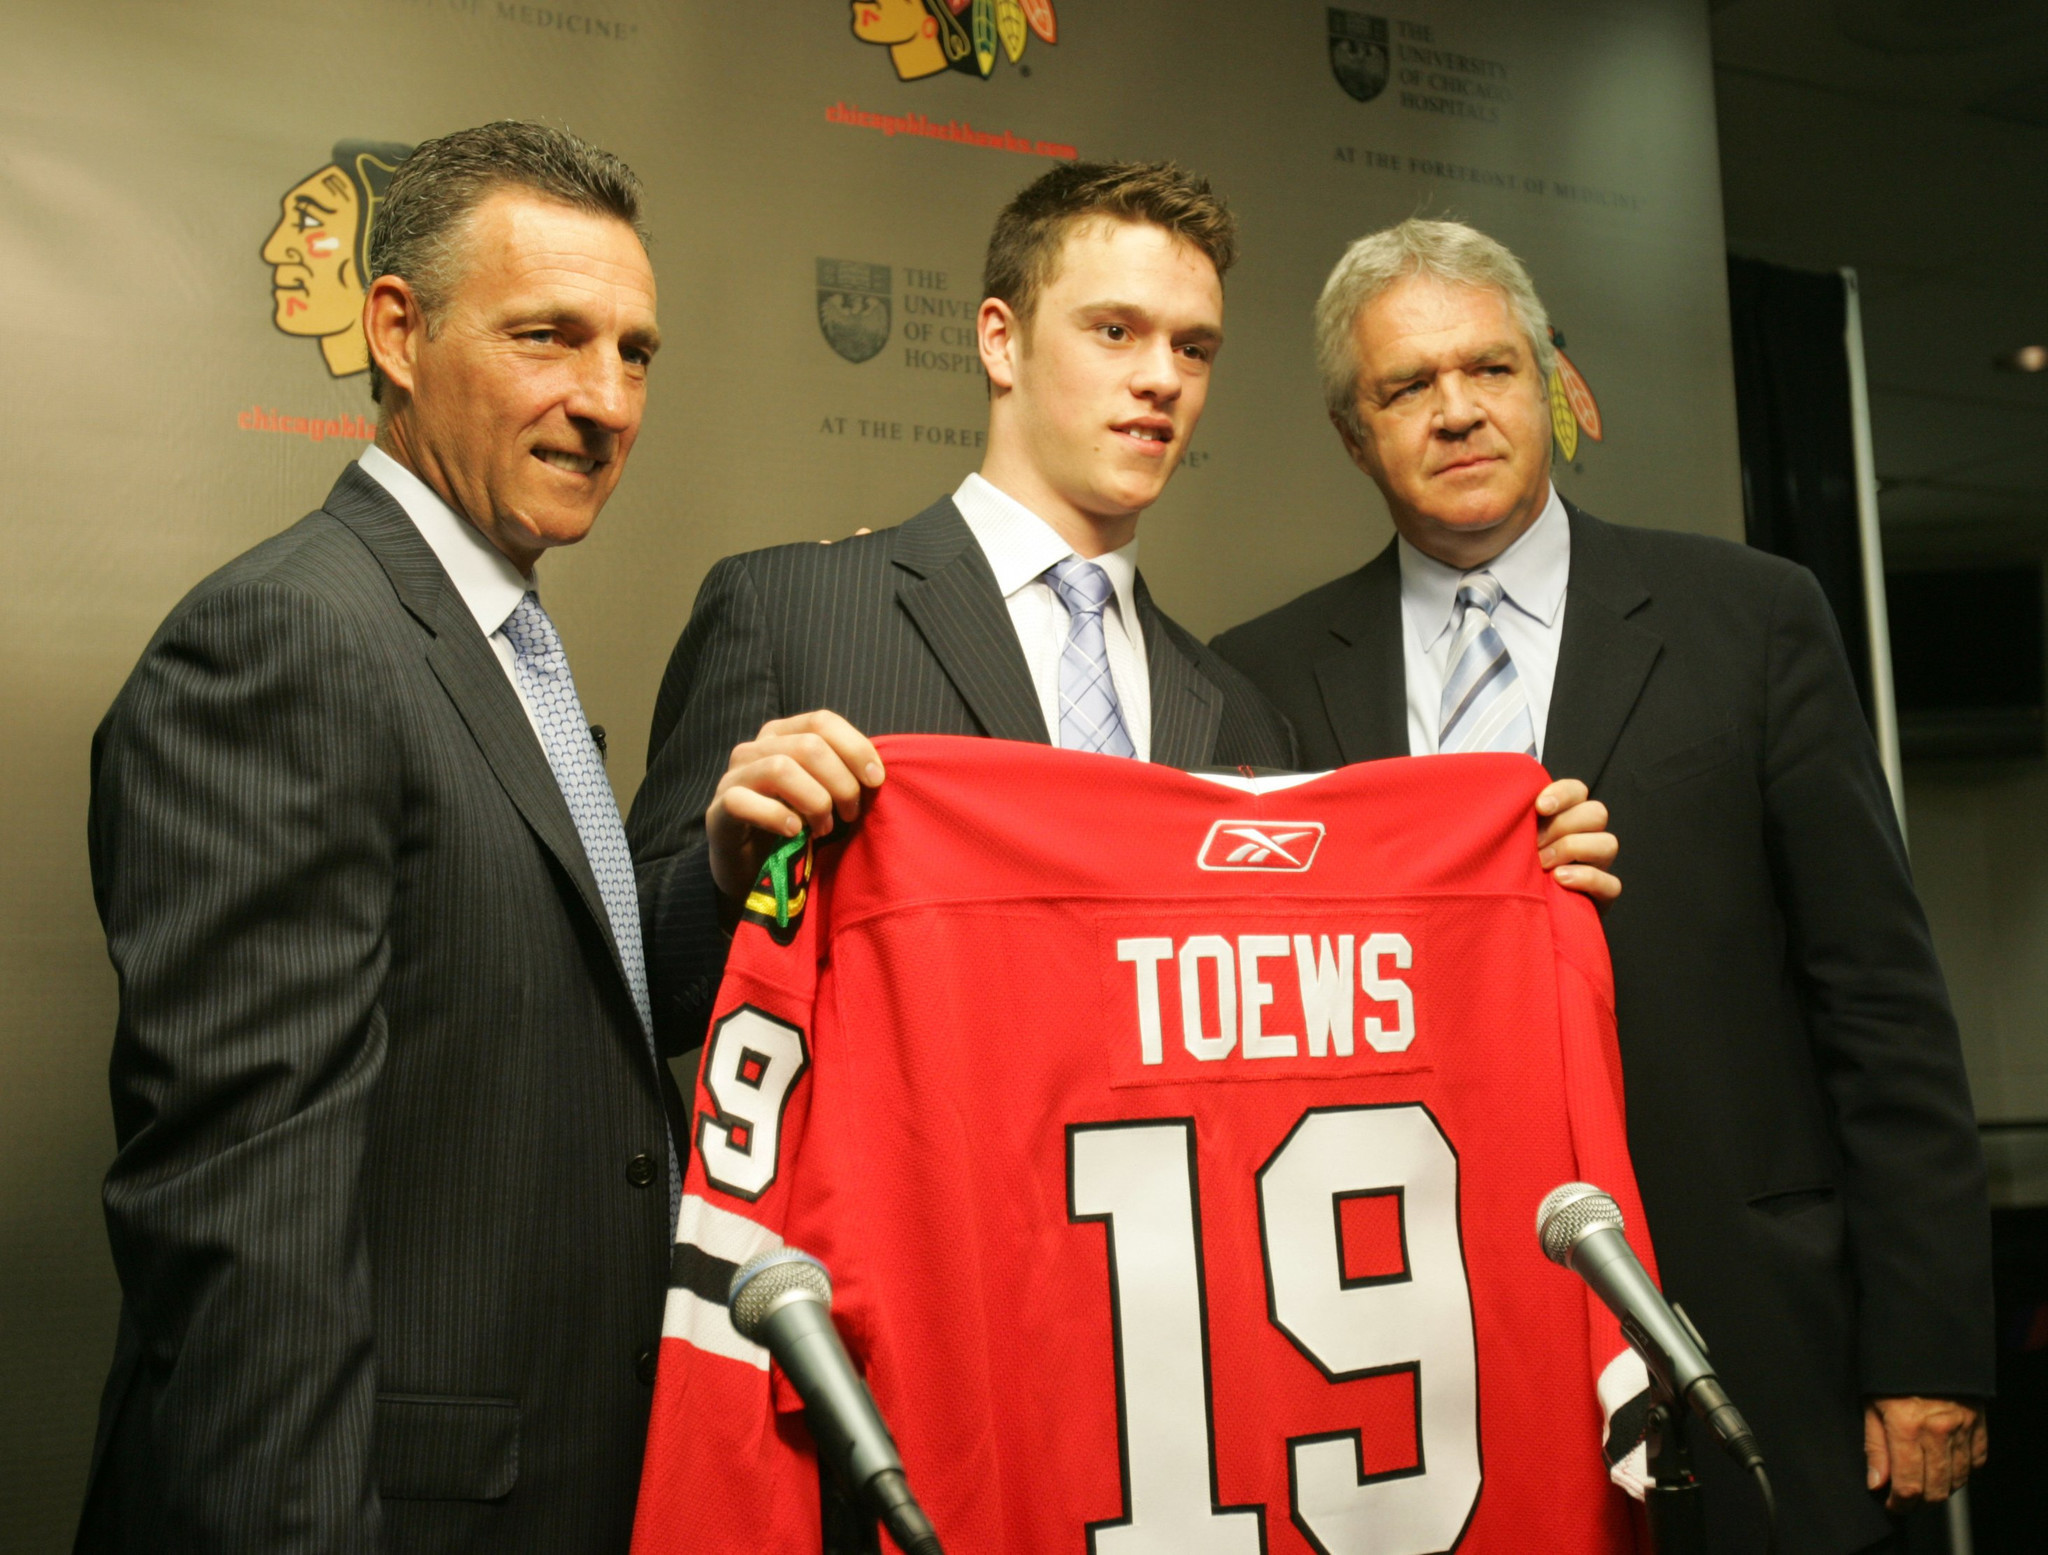 Jonathan Toews illness explained by local professionals